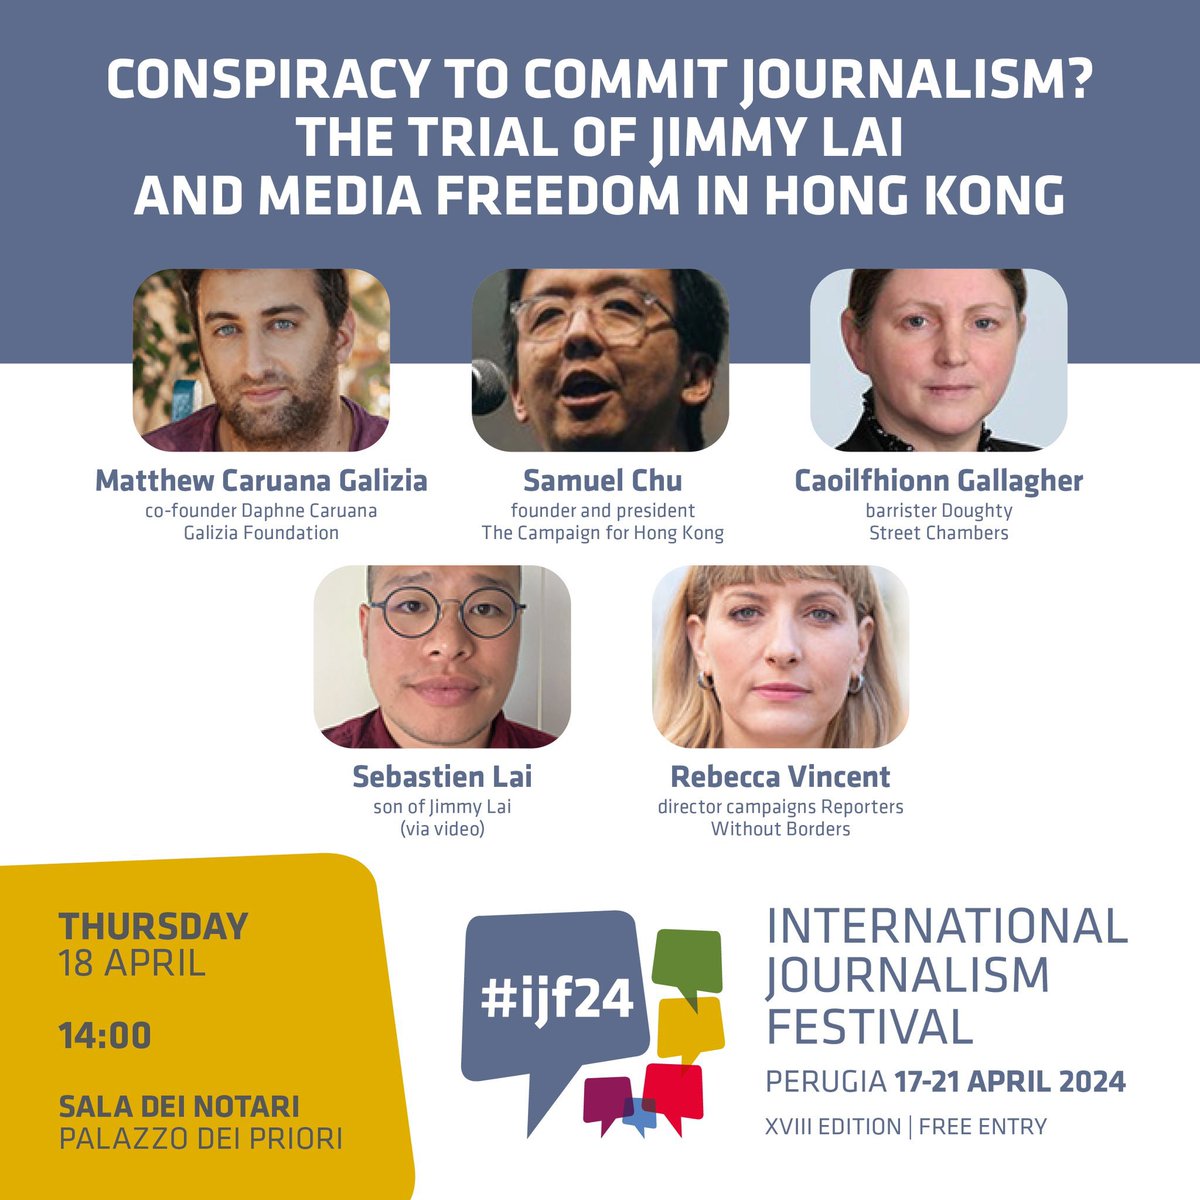 Just a week after my @RSF_inter colleague was detained and deported from Hong Kong, I’ll be moderating this #ijf24 panel today at 2 pm. Join me, Sebastien Lai, @samuelmchu, @caoilfhionnanna & @mcaruanagalizia to discuss Jimmy Lai’s trial and media freedom in Hong Kong.